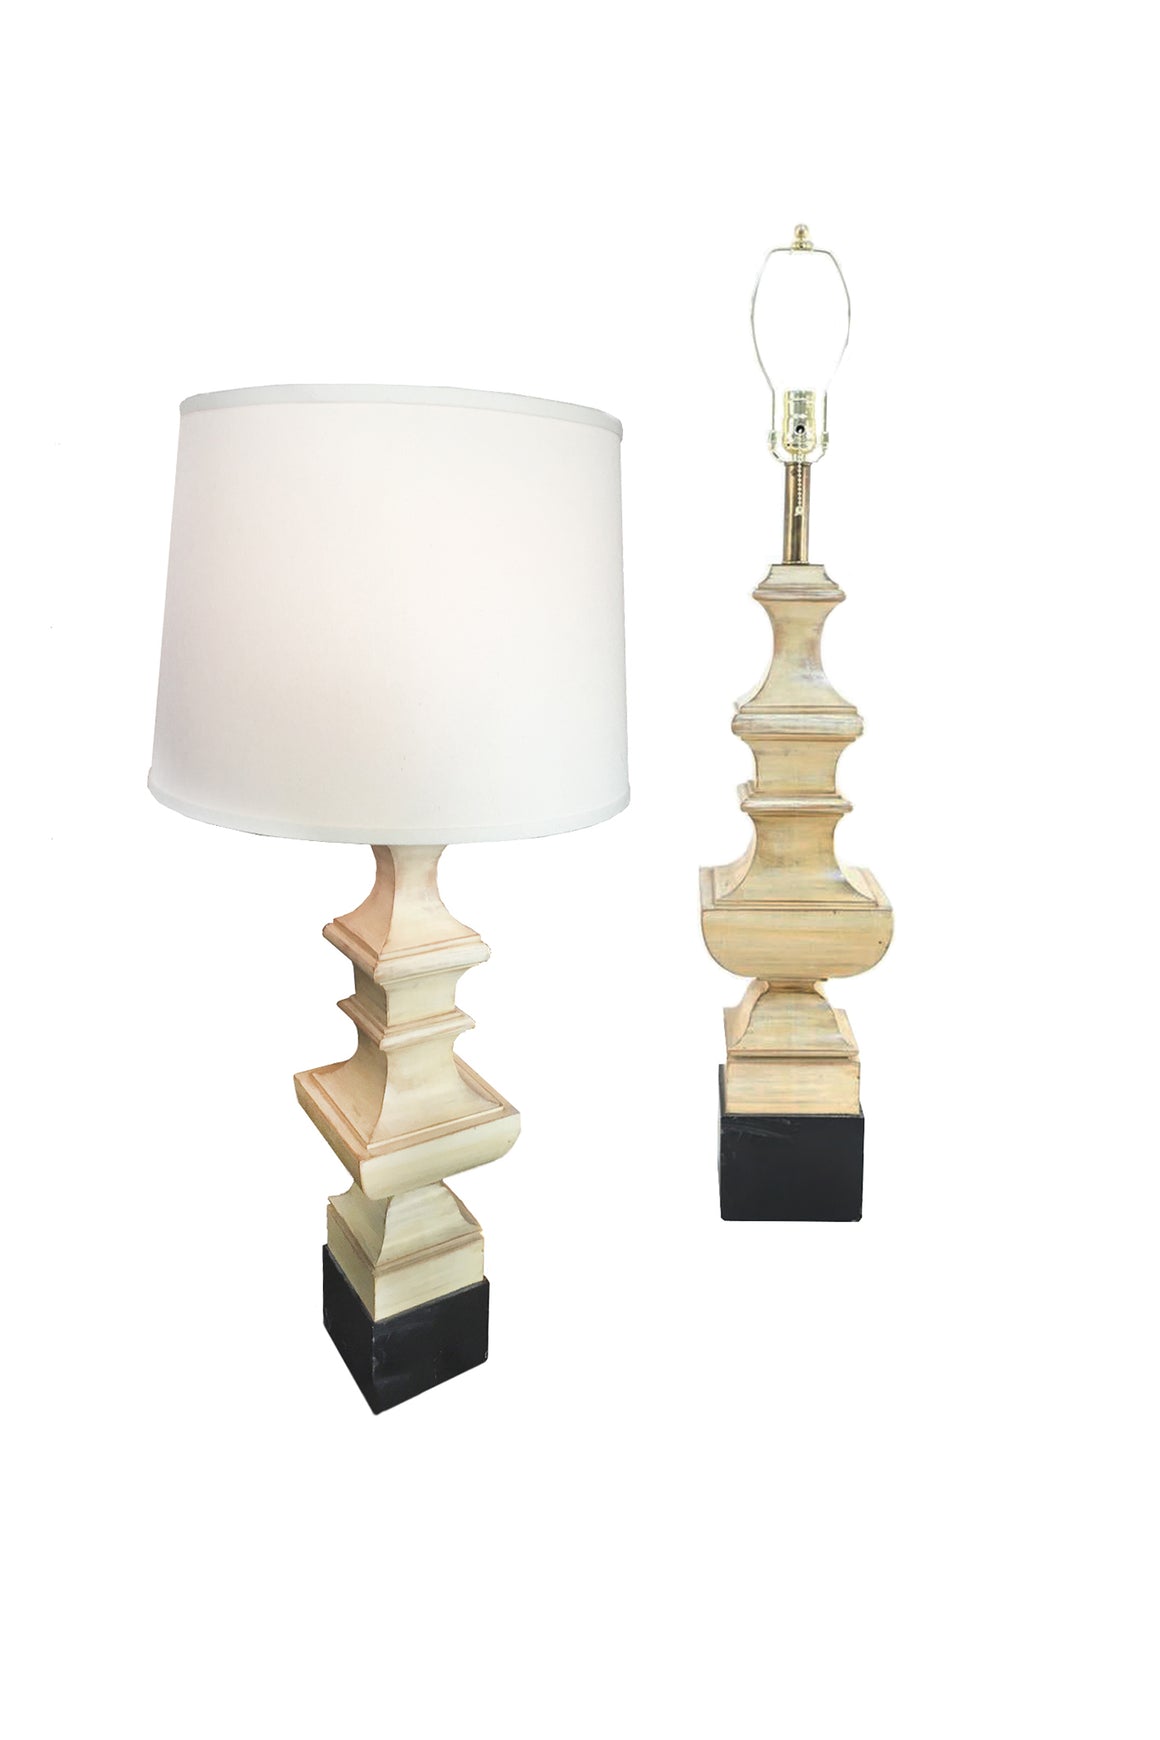 Pair of 20th Century Wood Chess Piece Column Table Lamps